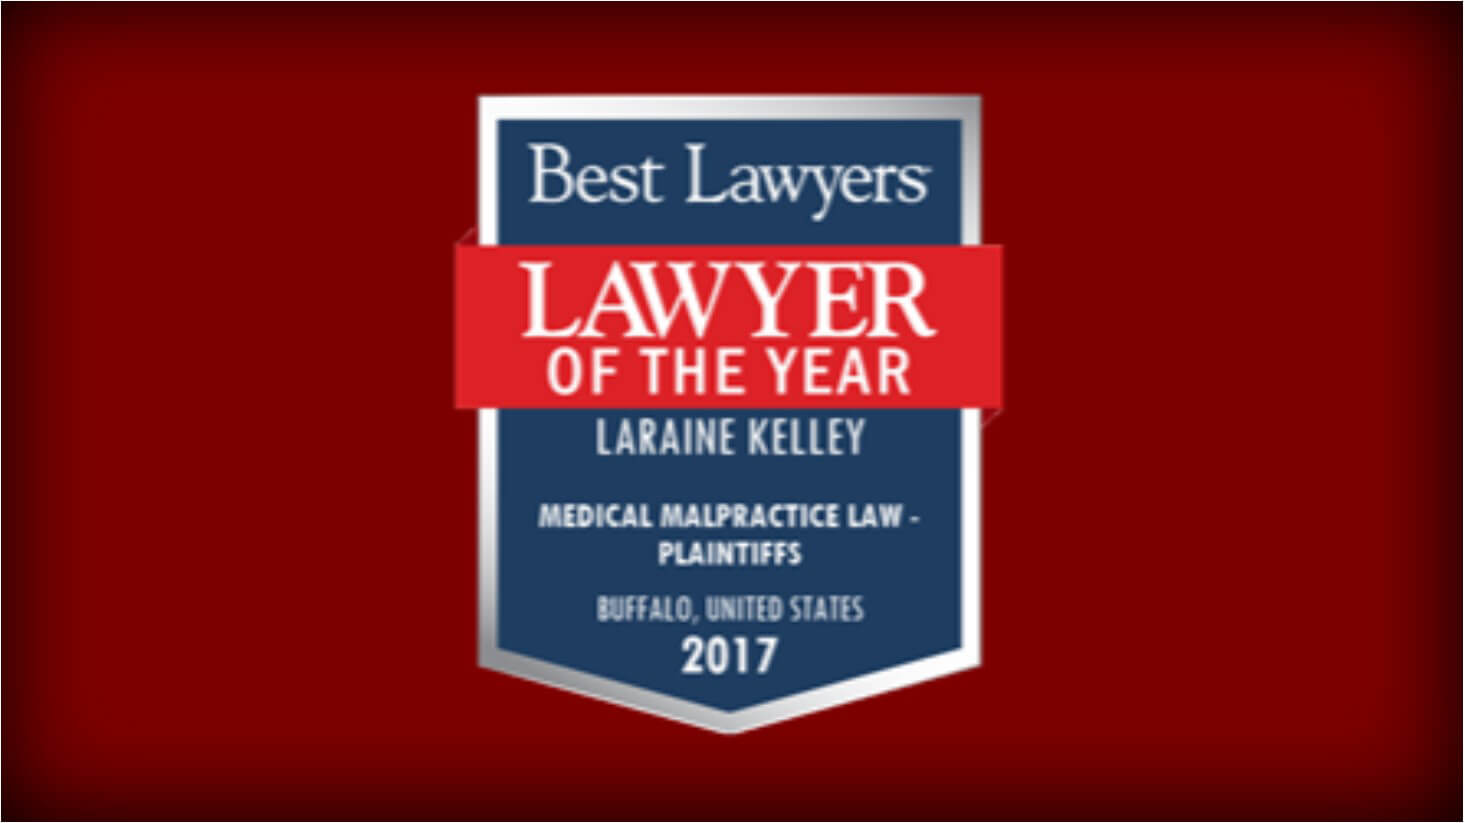 Medical Malpractice Lawyer of the Year